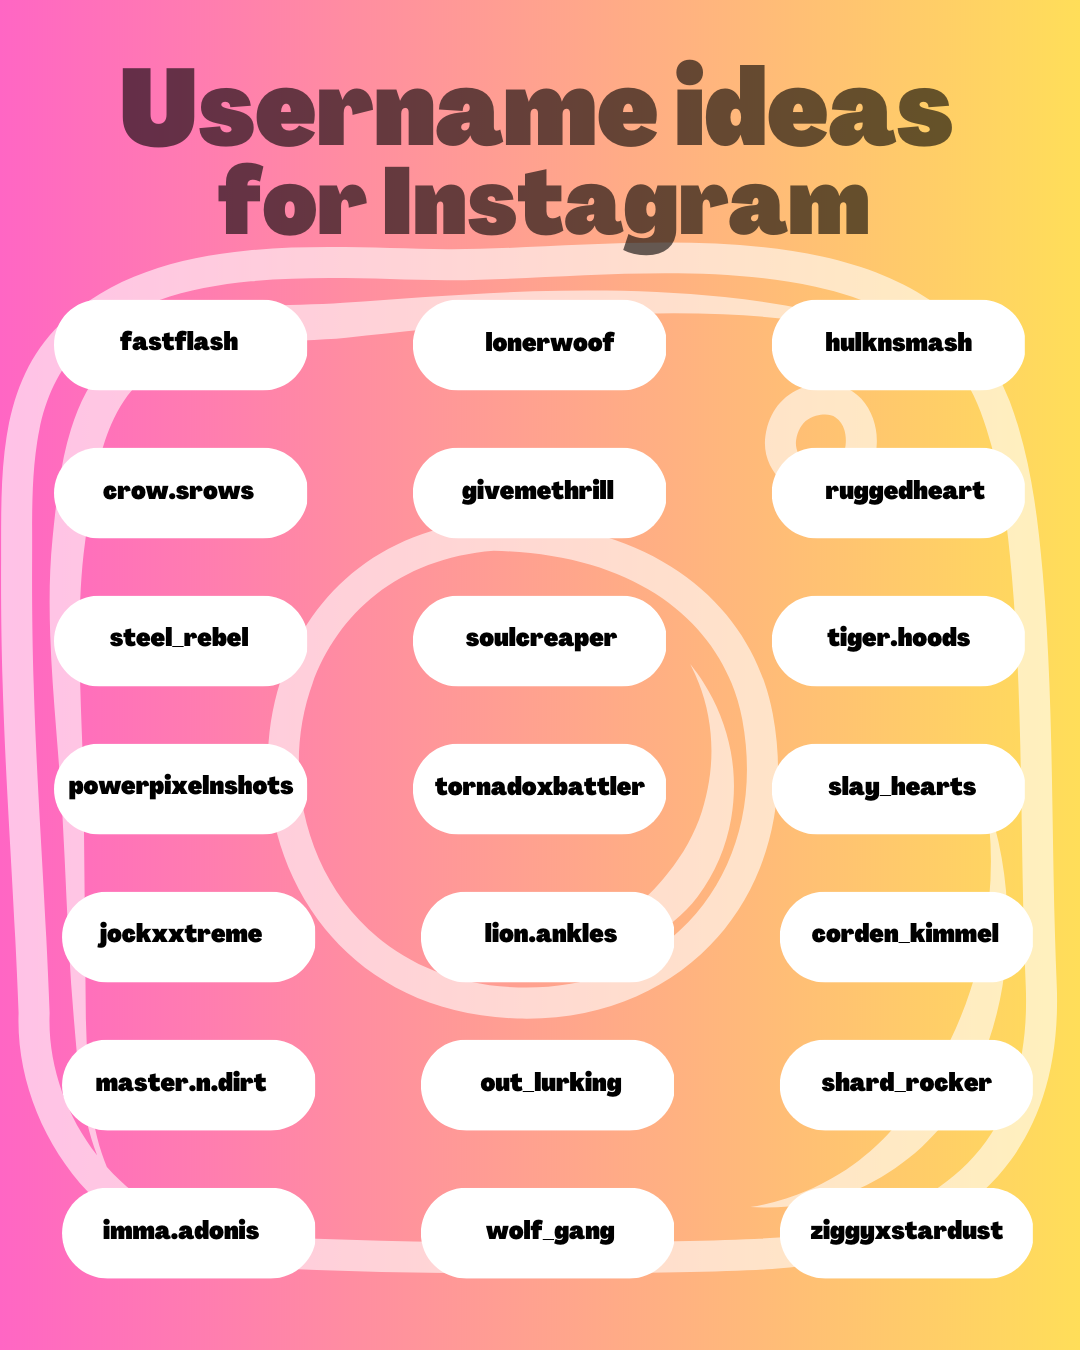 Remote.tools shares a list of username ideas for your instagram profile.